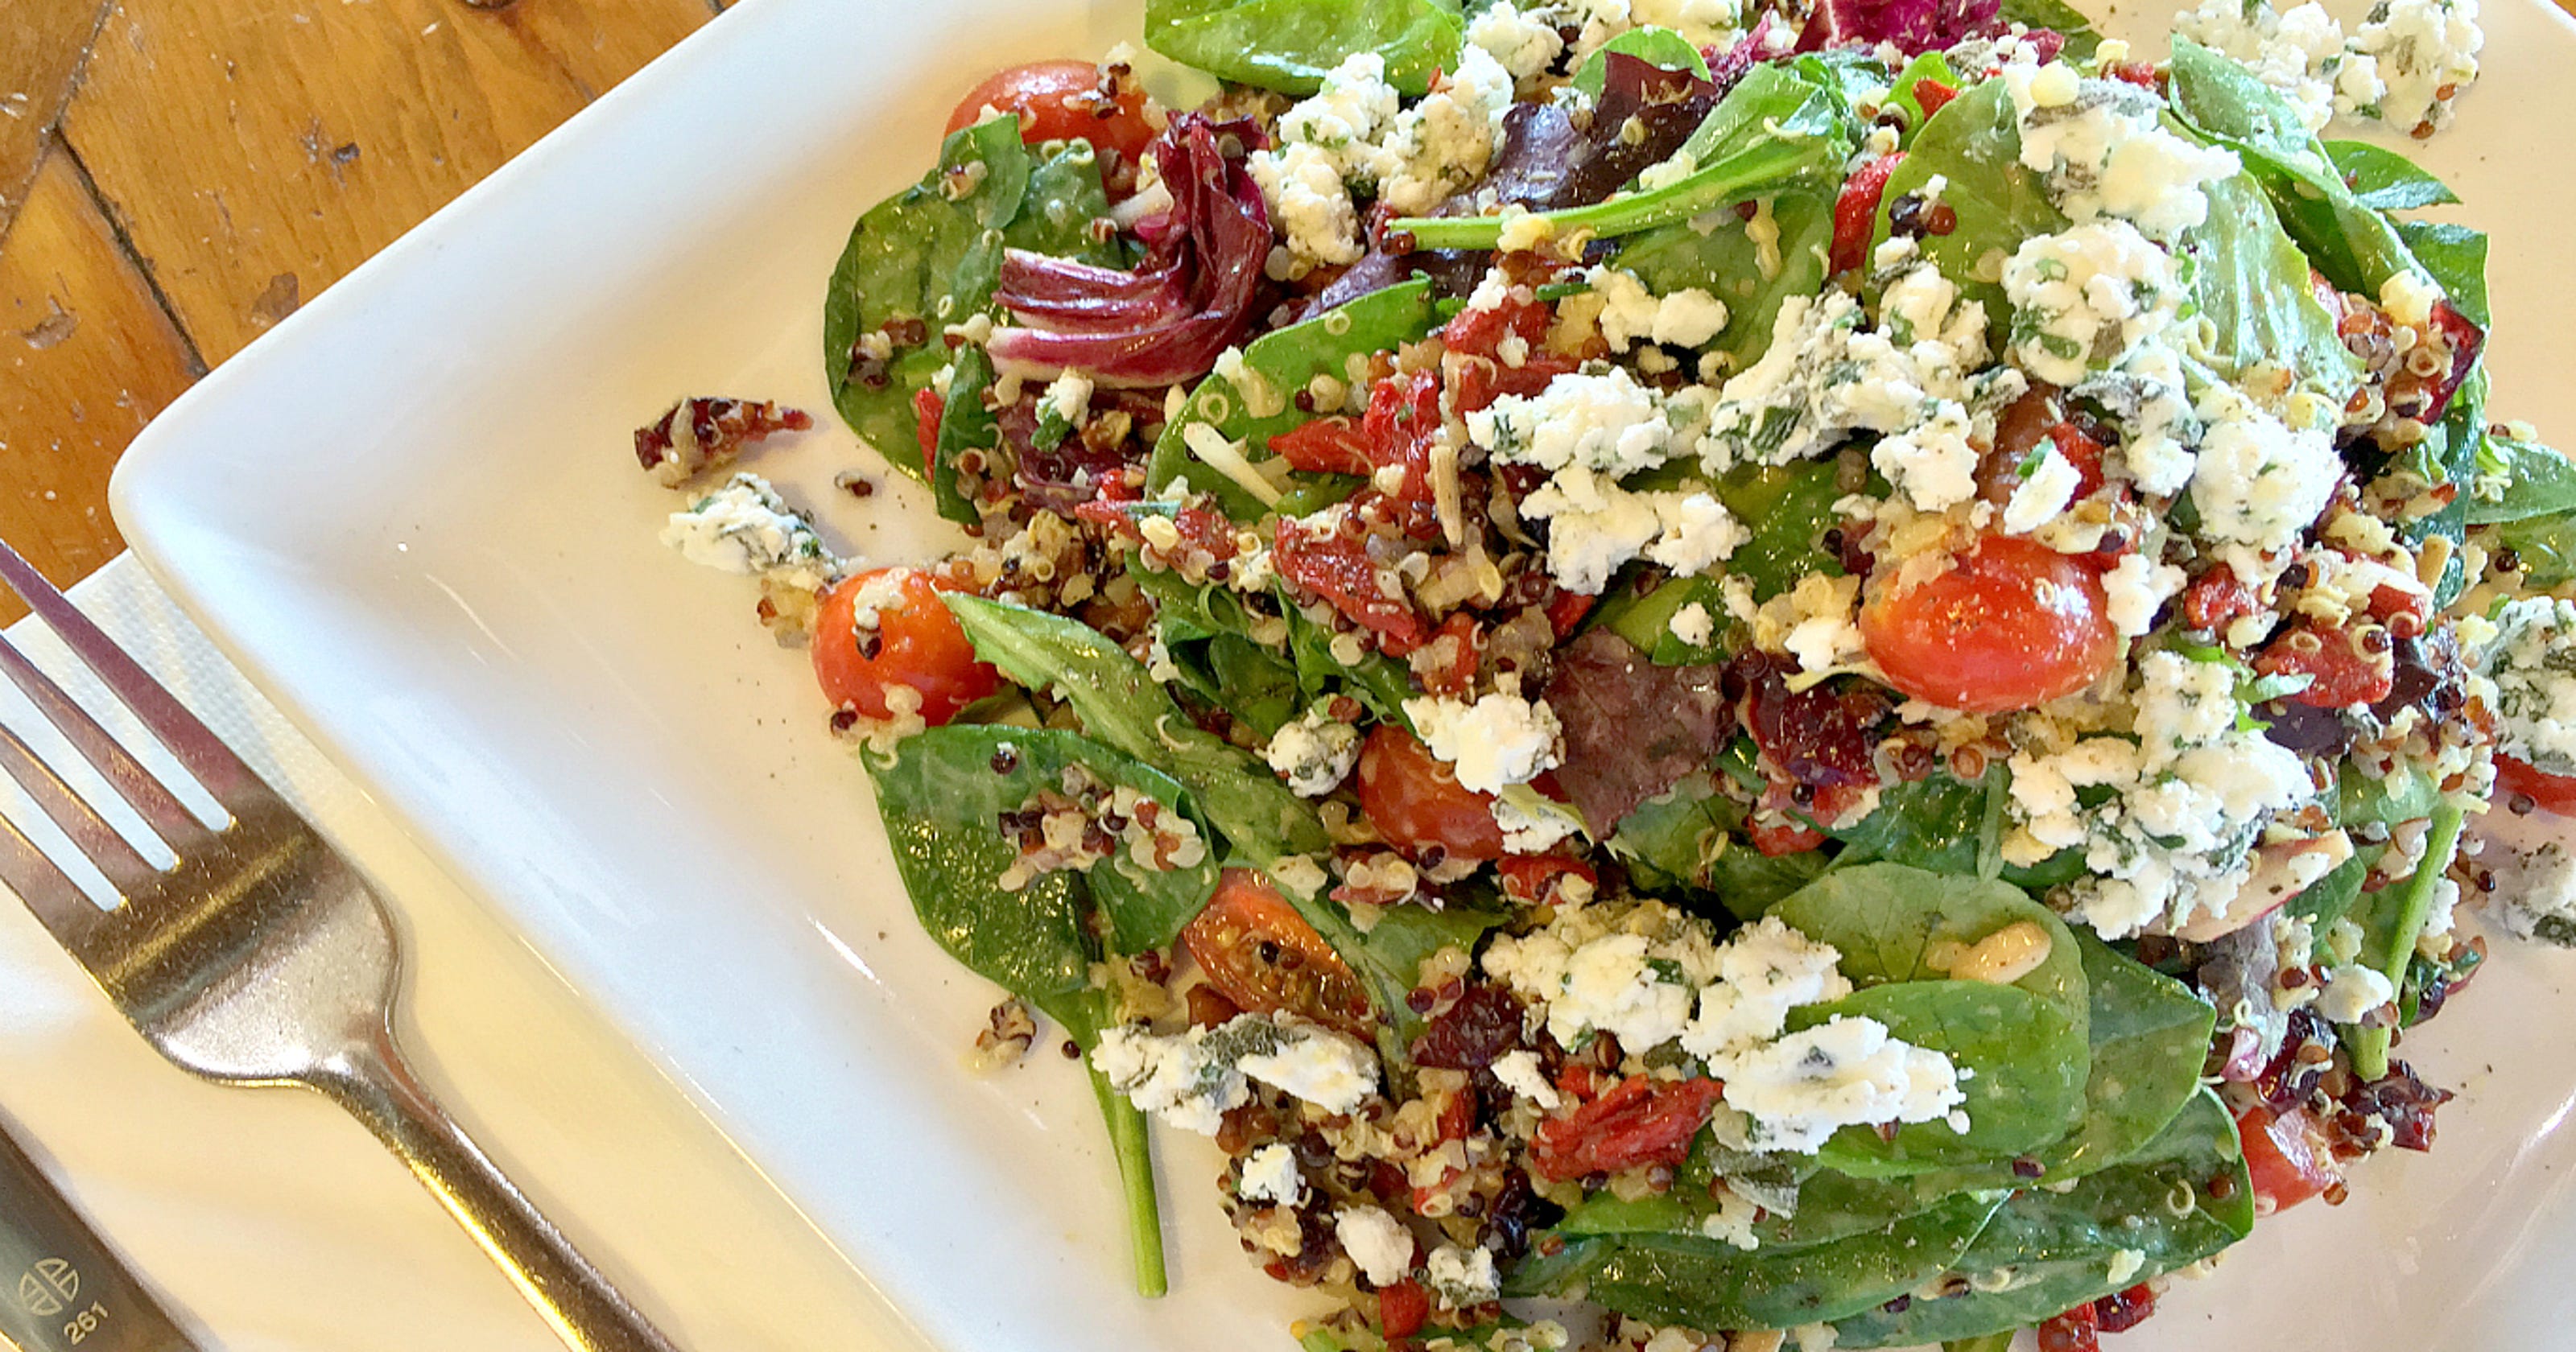 20 places for salads in metro Phoenix